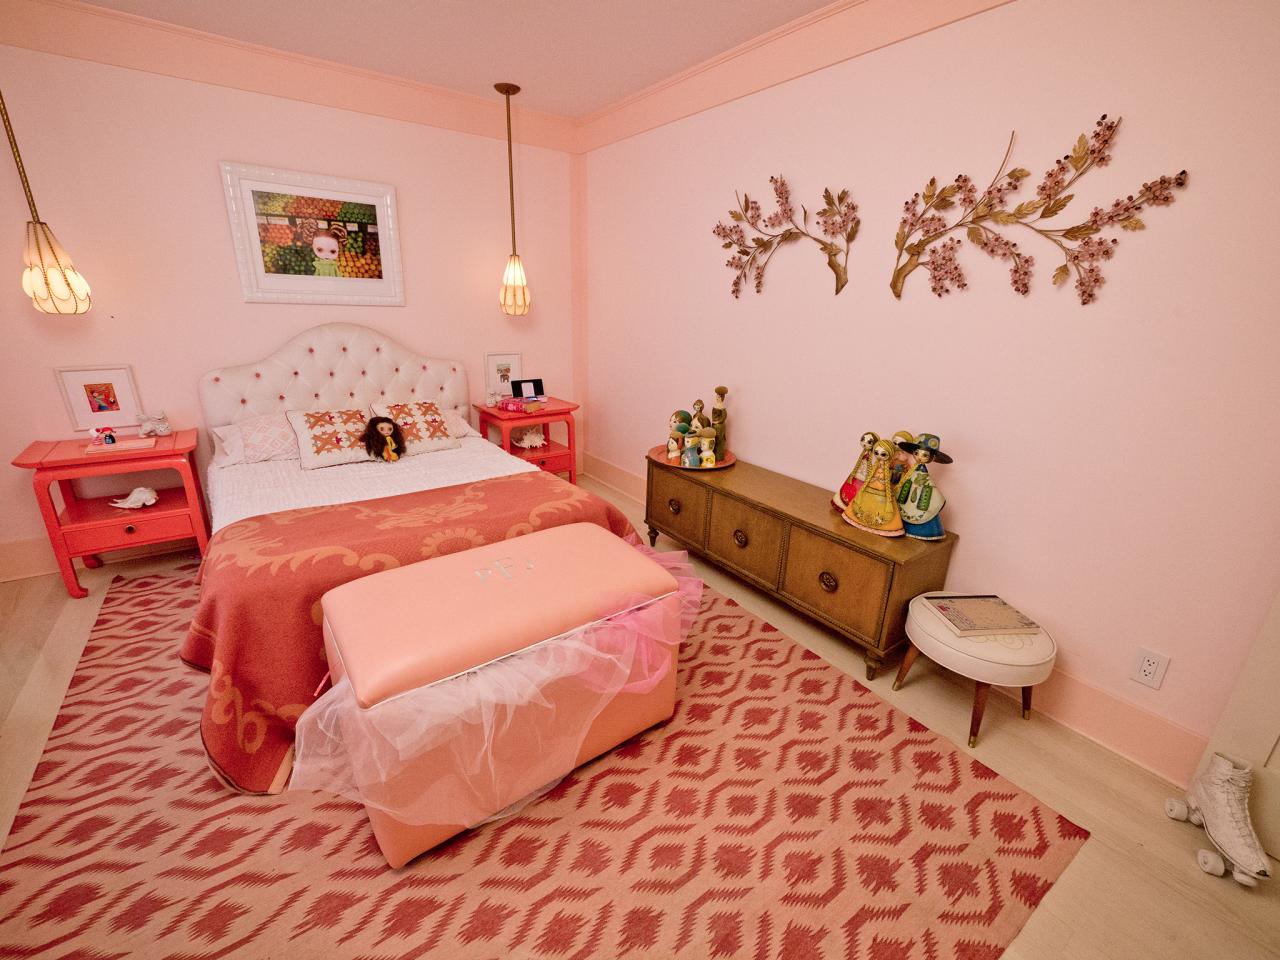 Girls' Bedroom Color Schemes: Pictures, Options & Ideas | HGTV